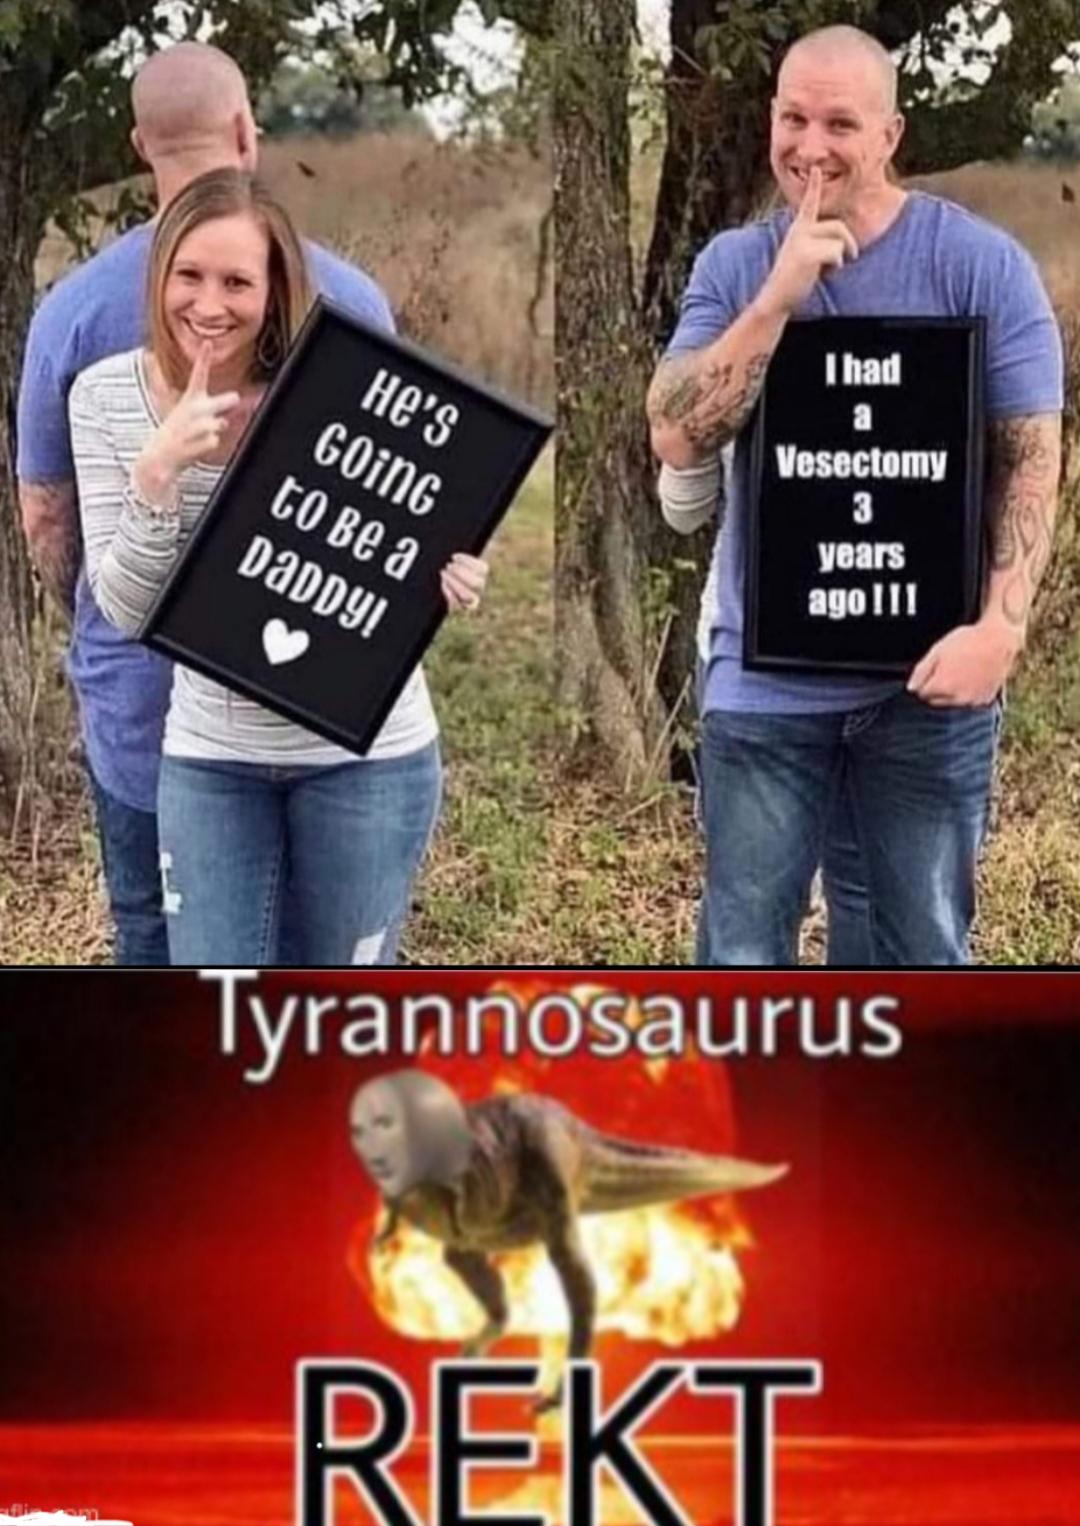 pregnancy announcement after vasectomy - He's Going to be a Daddy! I had a Vesectomy 3 years agolli Tyrannosaurus Rekt